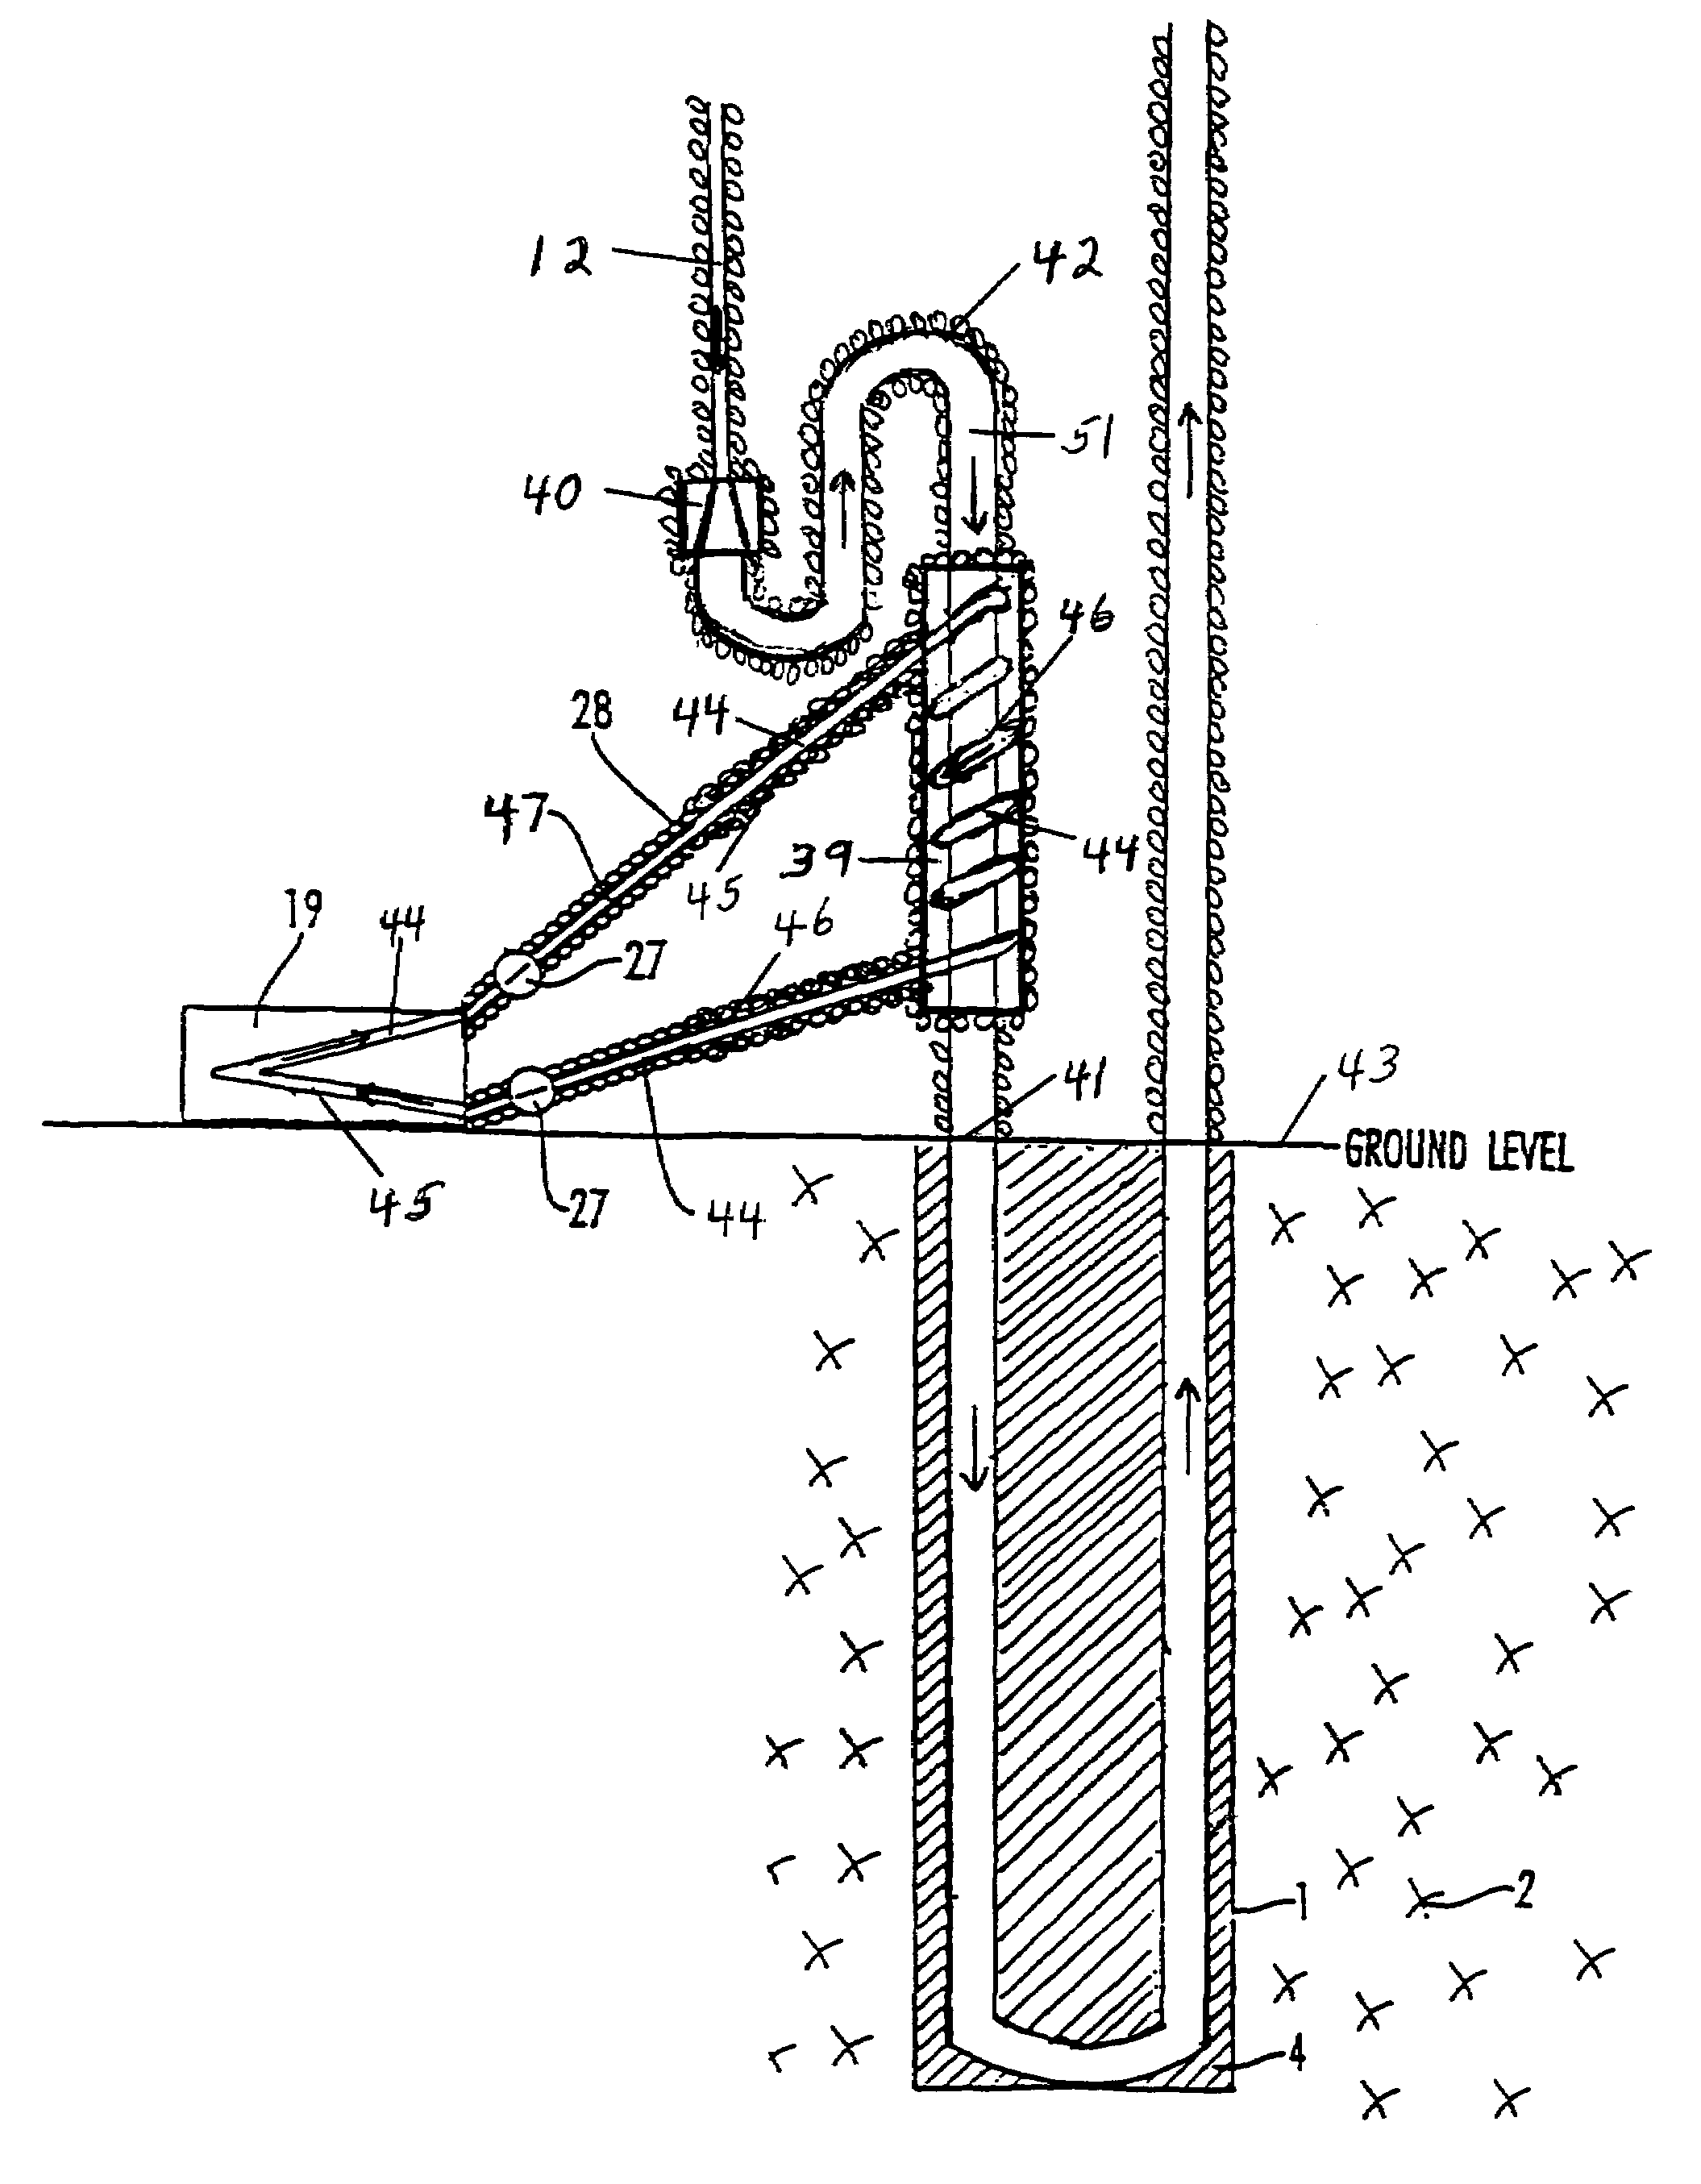 Geothermal heating and cooling system with solar heating